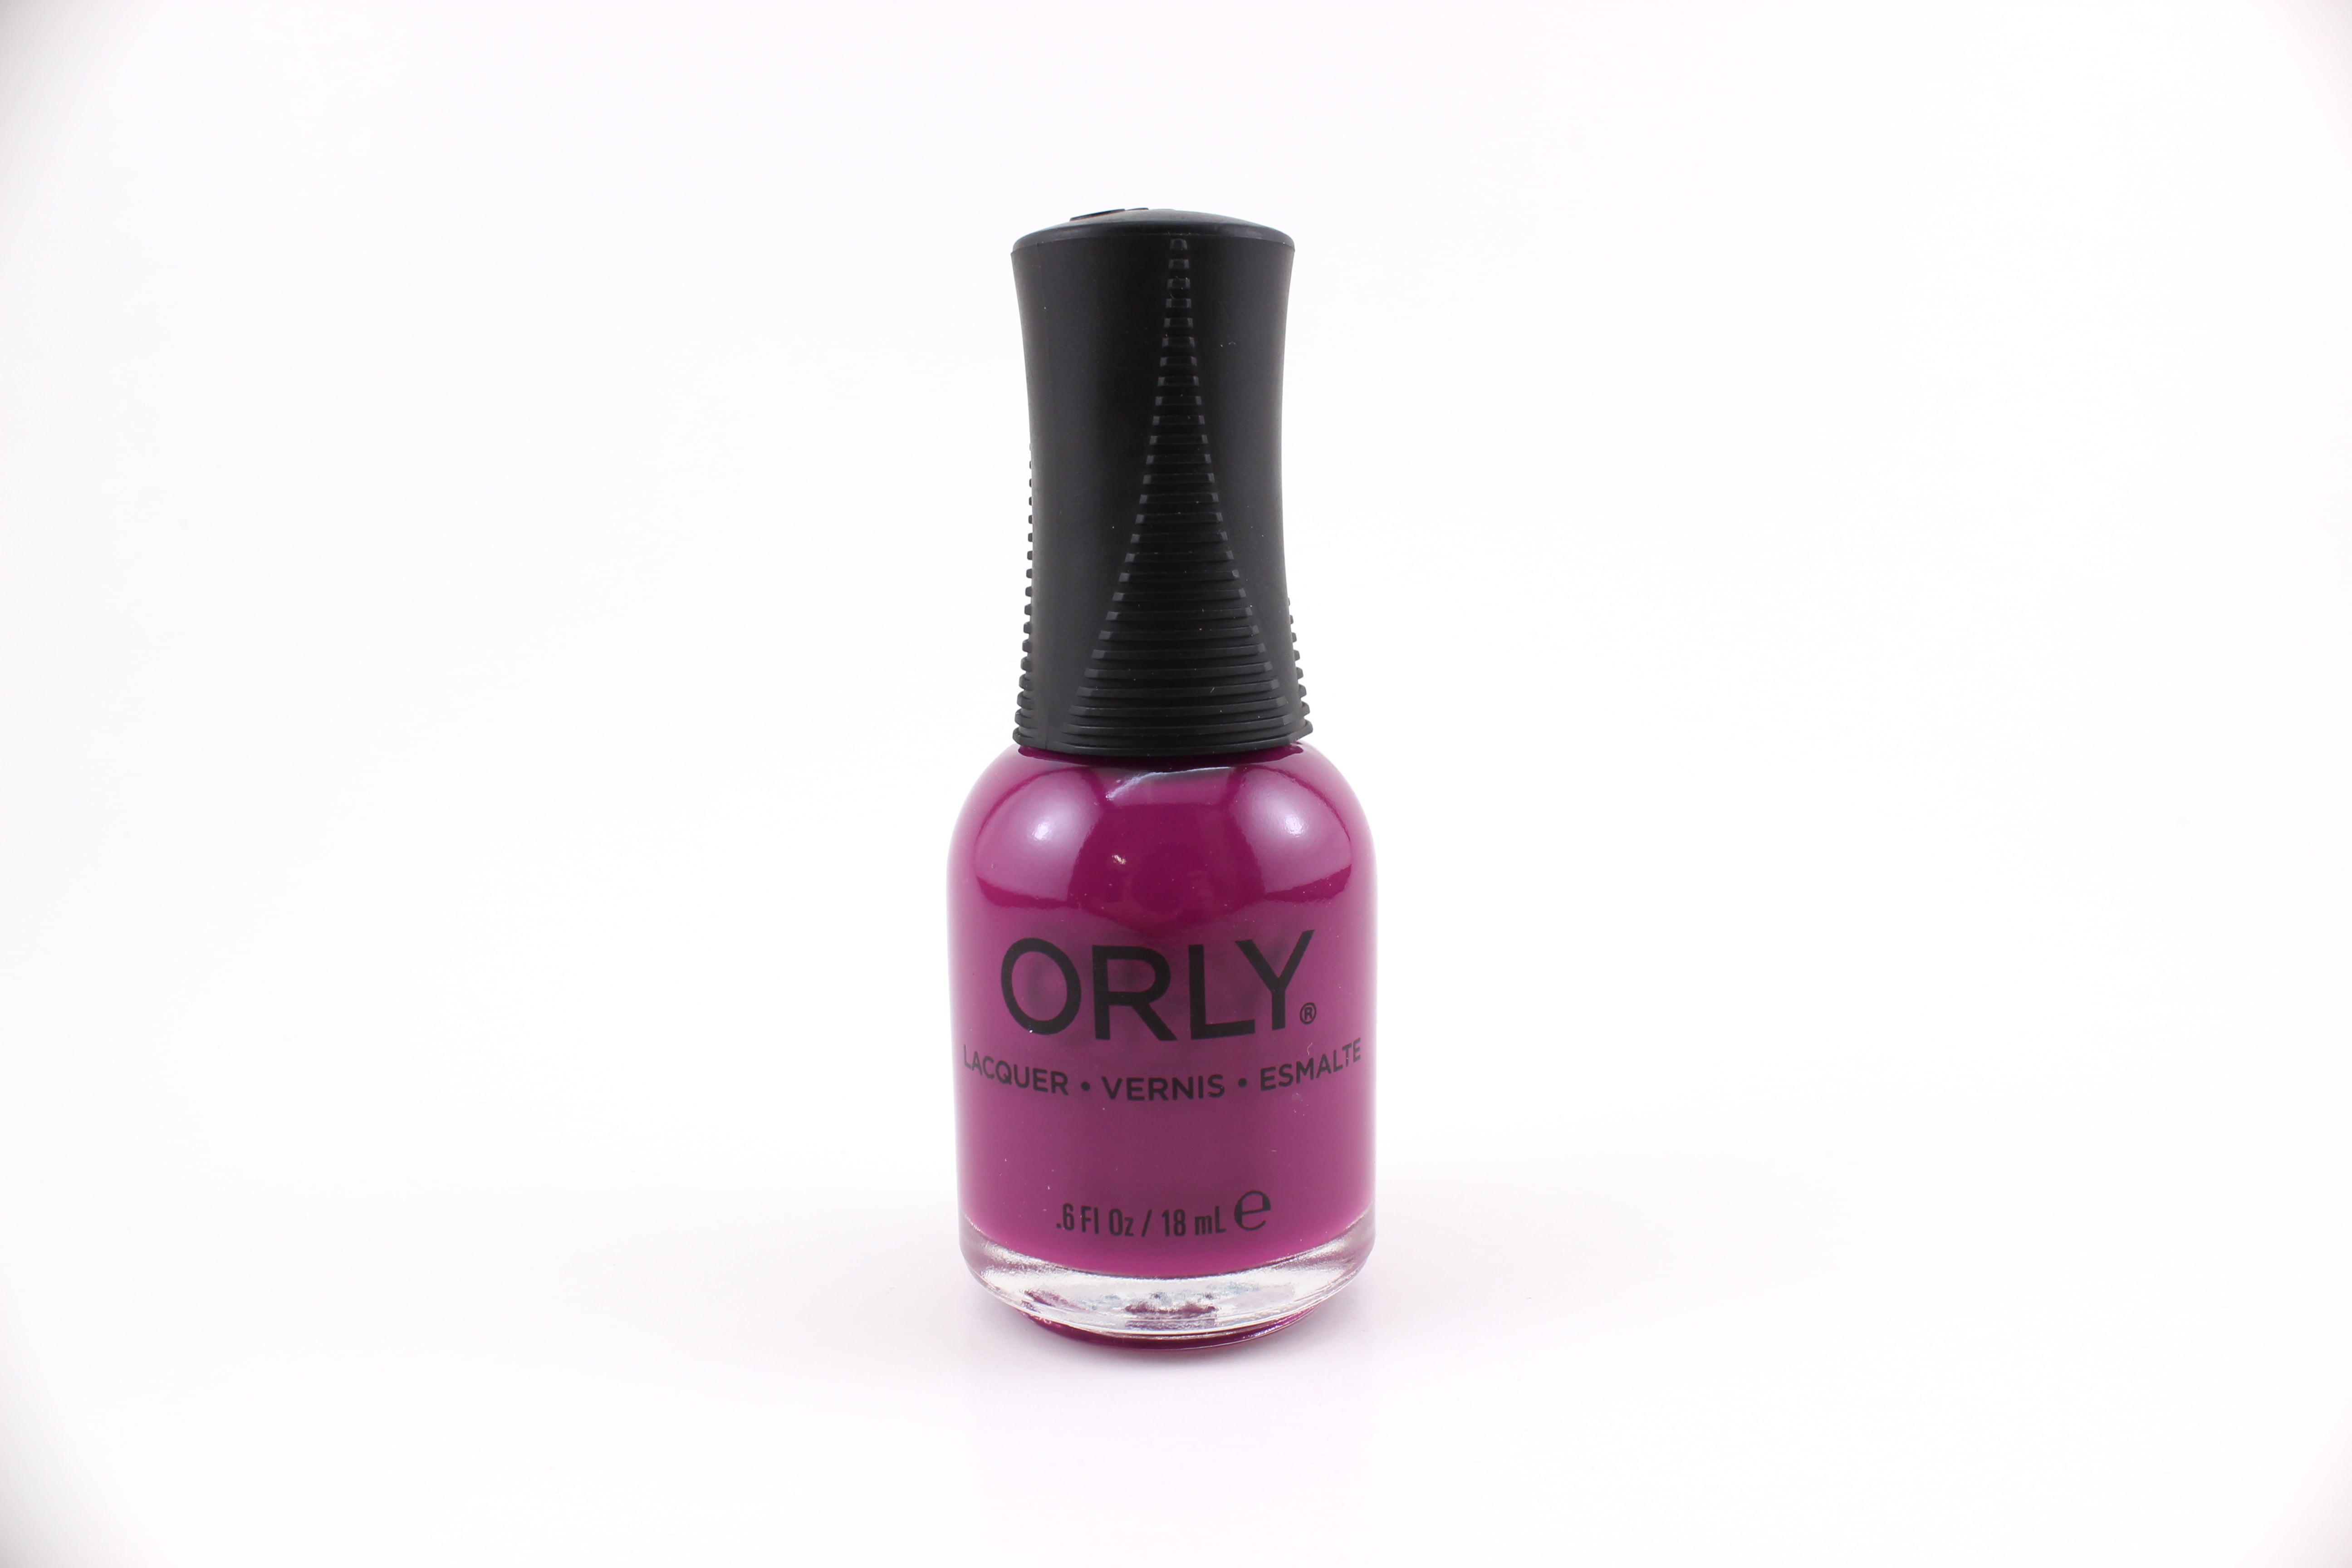 Orly Nail Lacquer in "Cotton Candy" - wide 9